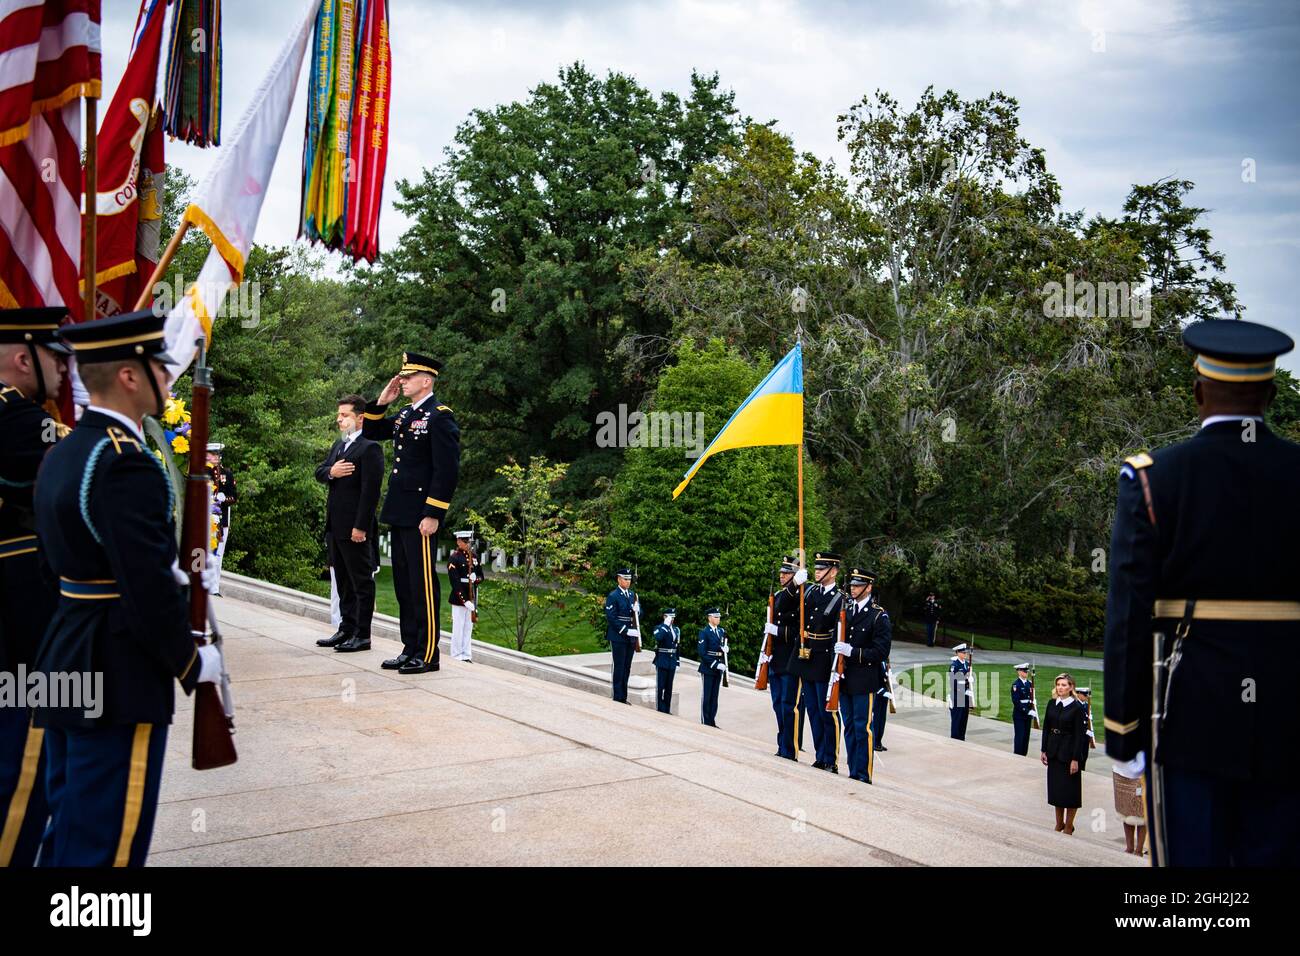 Ukrainian President Volodymyr Zelenskyy, left, and U.S. Army Maj. Gen. Allan Pepin during a full honors wreath laying ceremony at the Tomb of the Unknown Soldier at Arlington National Cemetery September 1, 2021 in Arlington, Virginia. Stock Photo